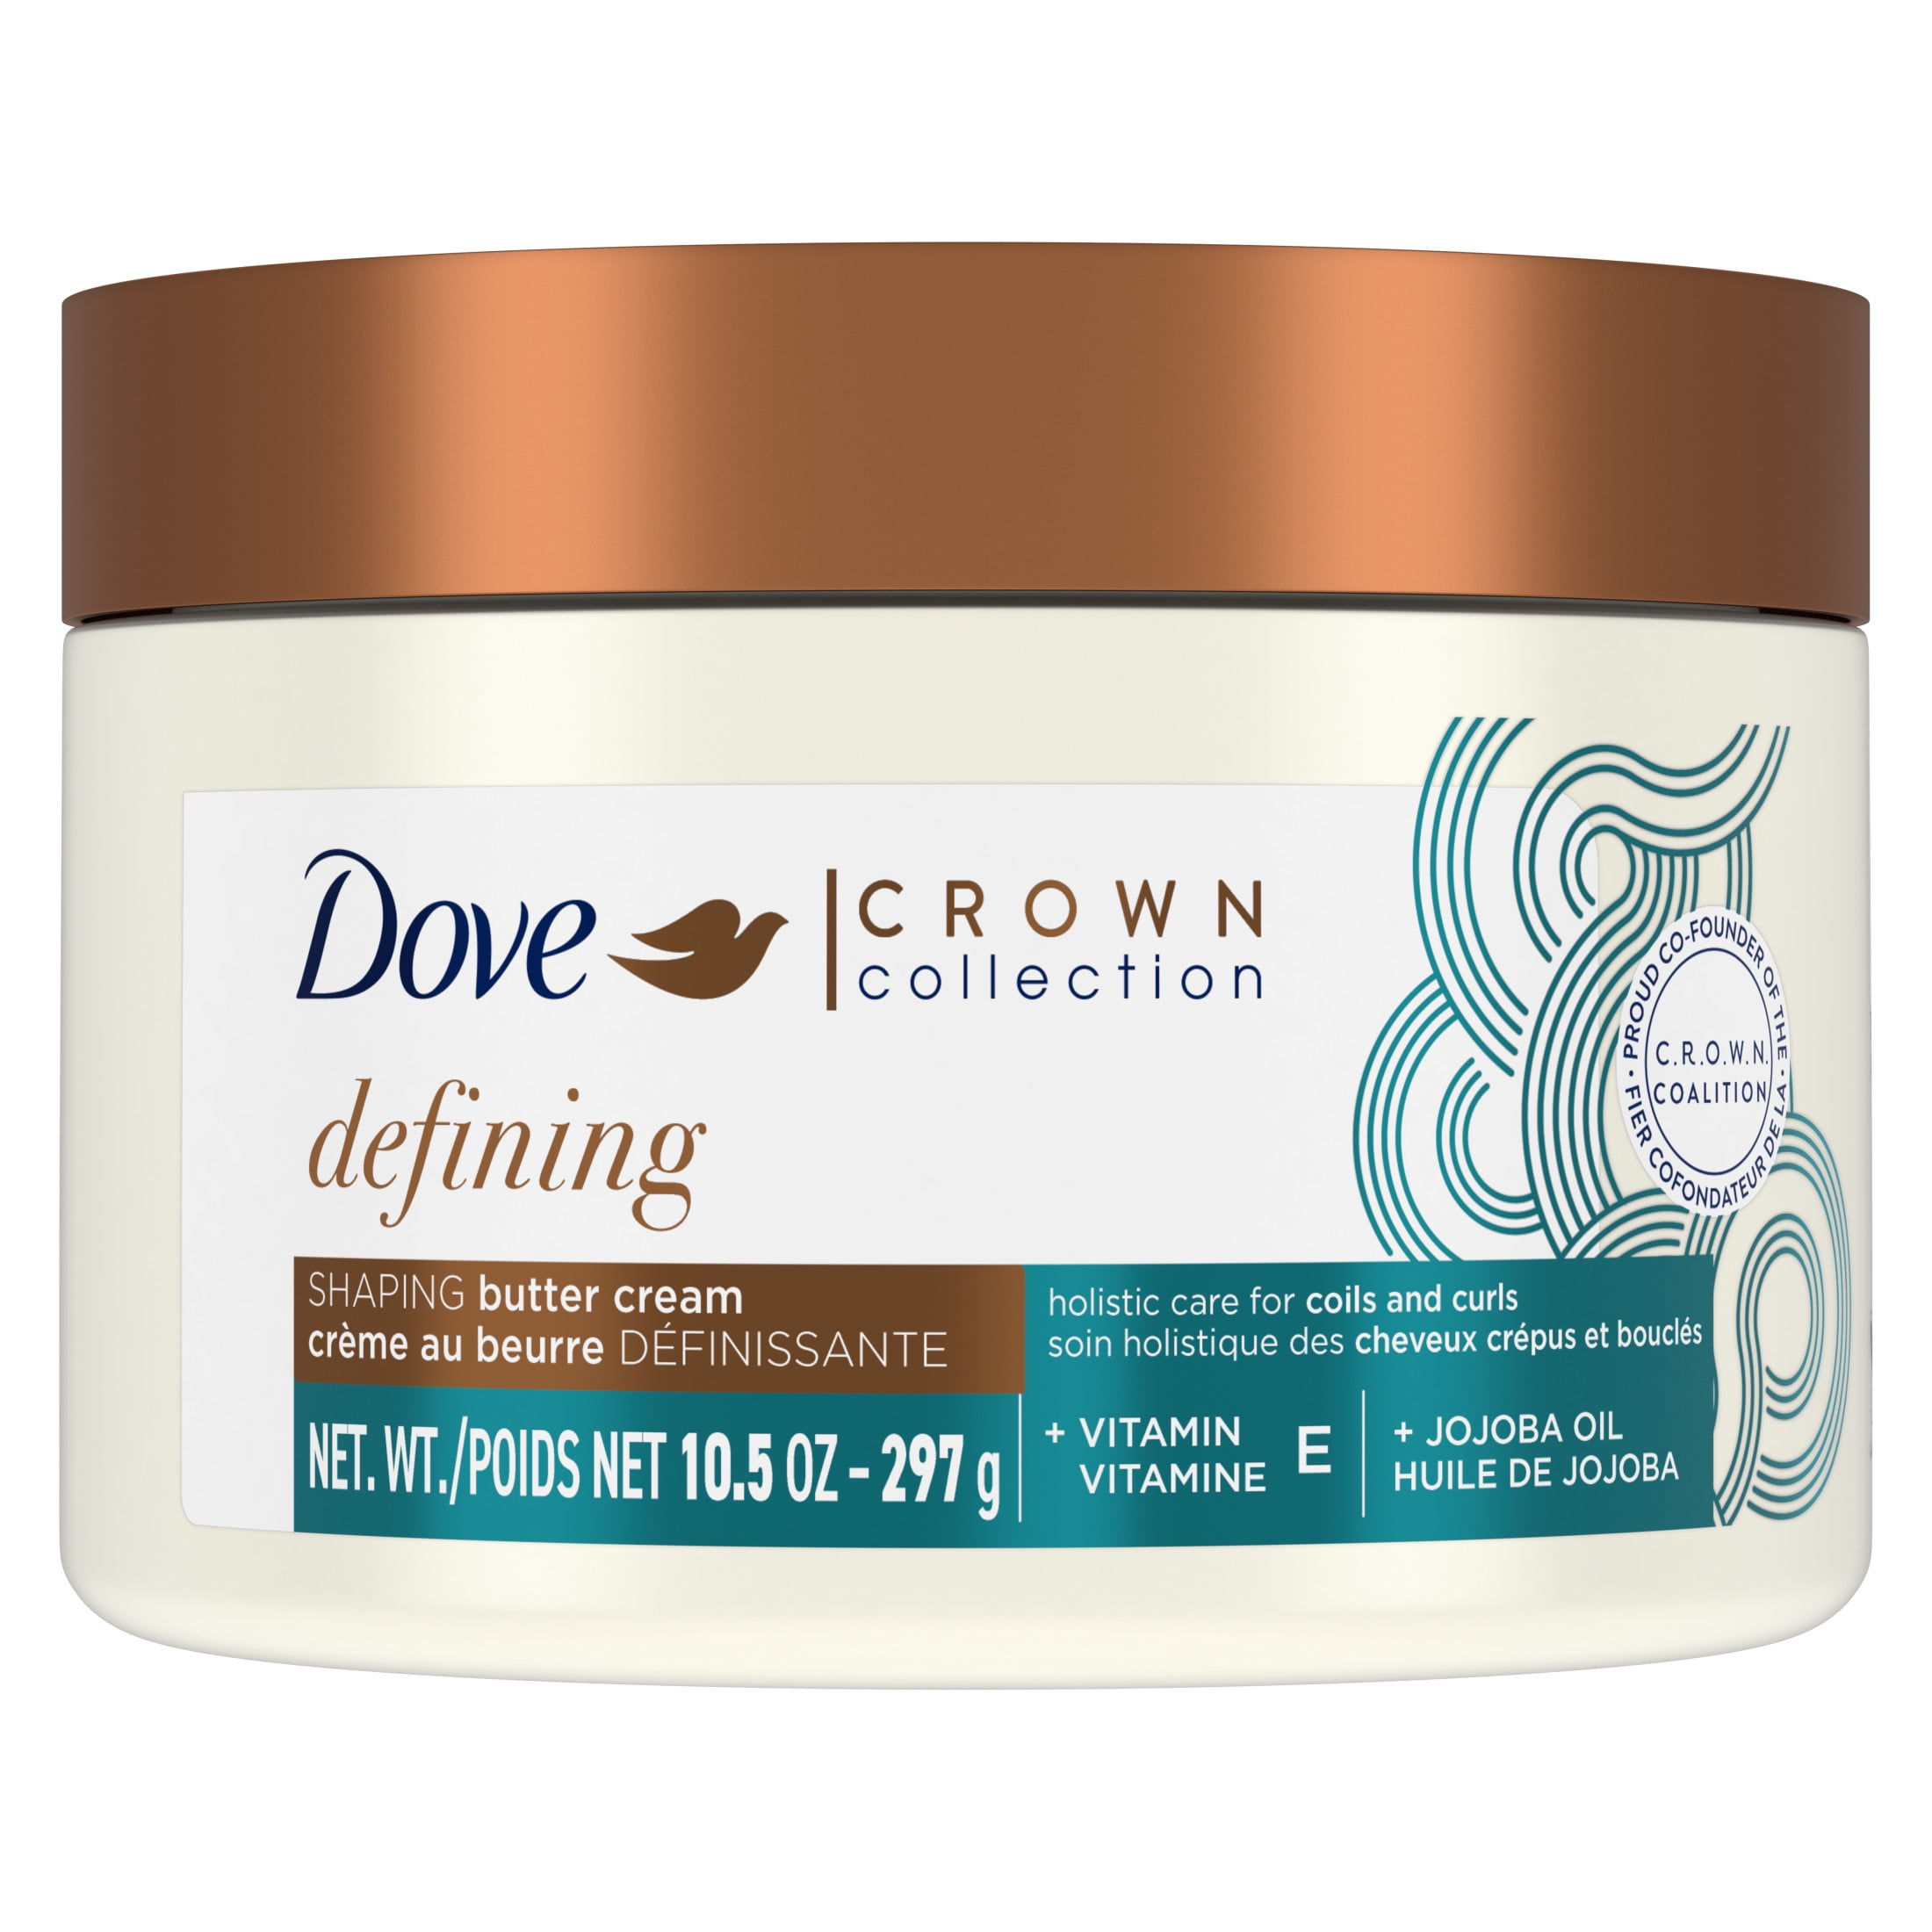 Dove CROWN Collection Holistic Hair Care Defining, 10.5 oz